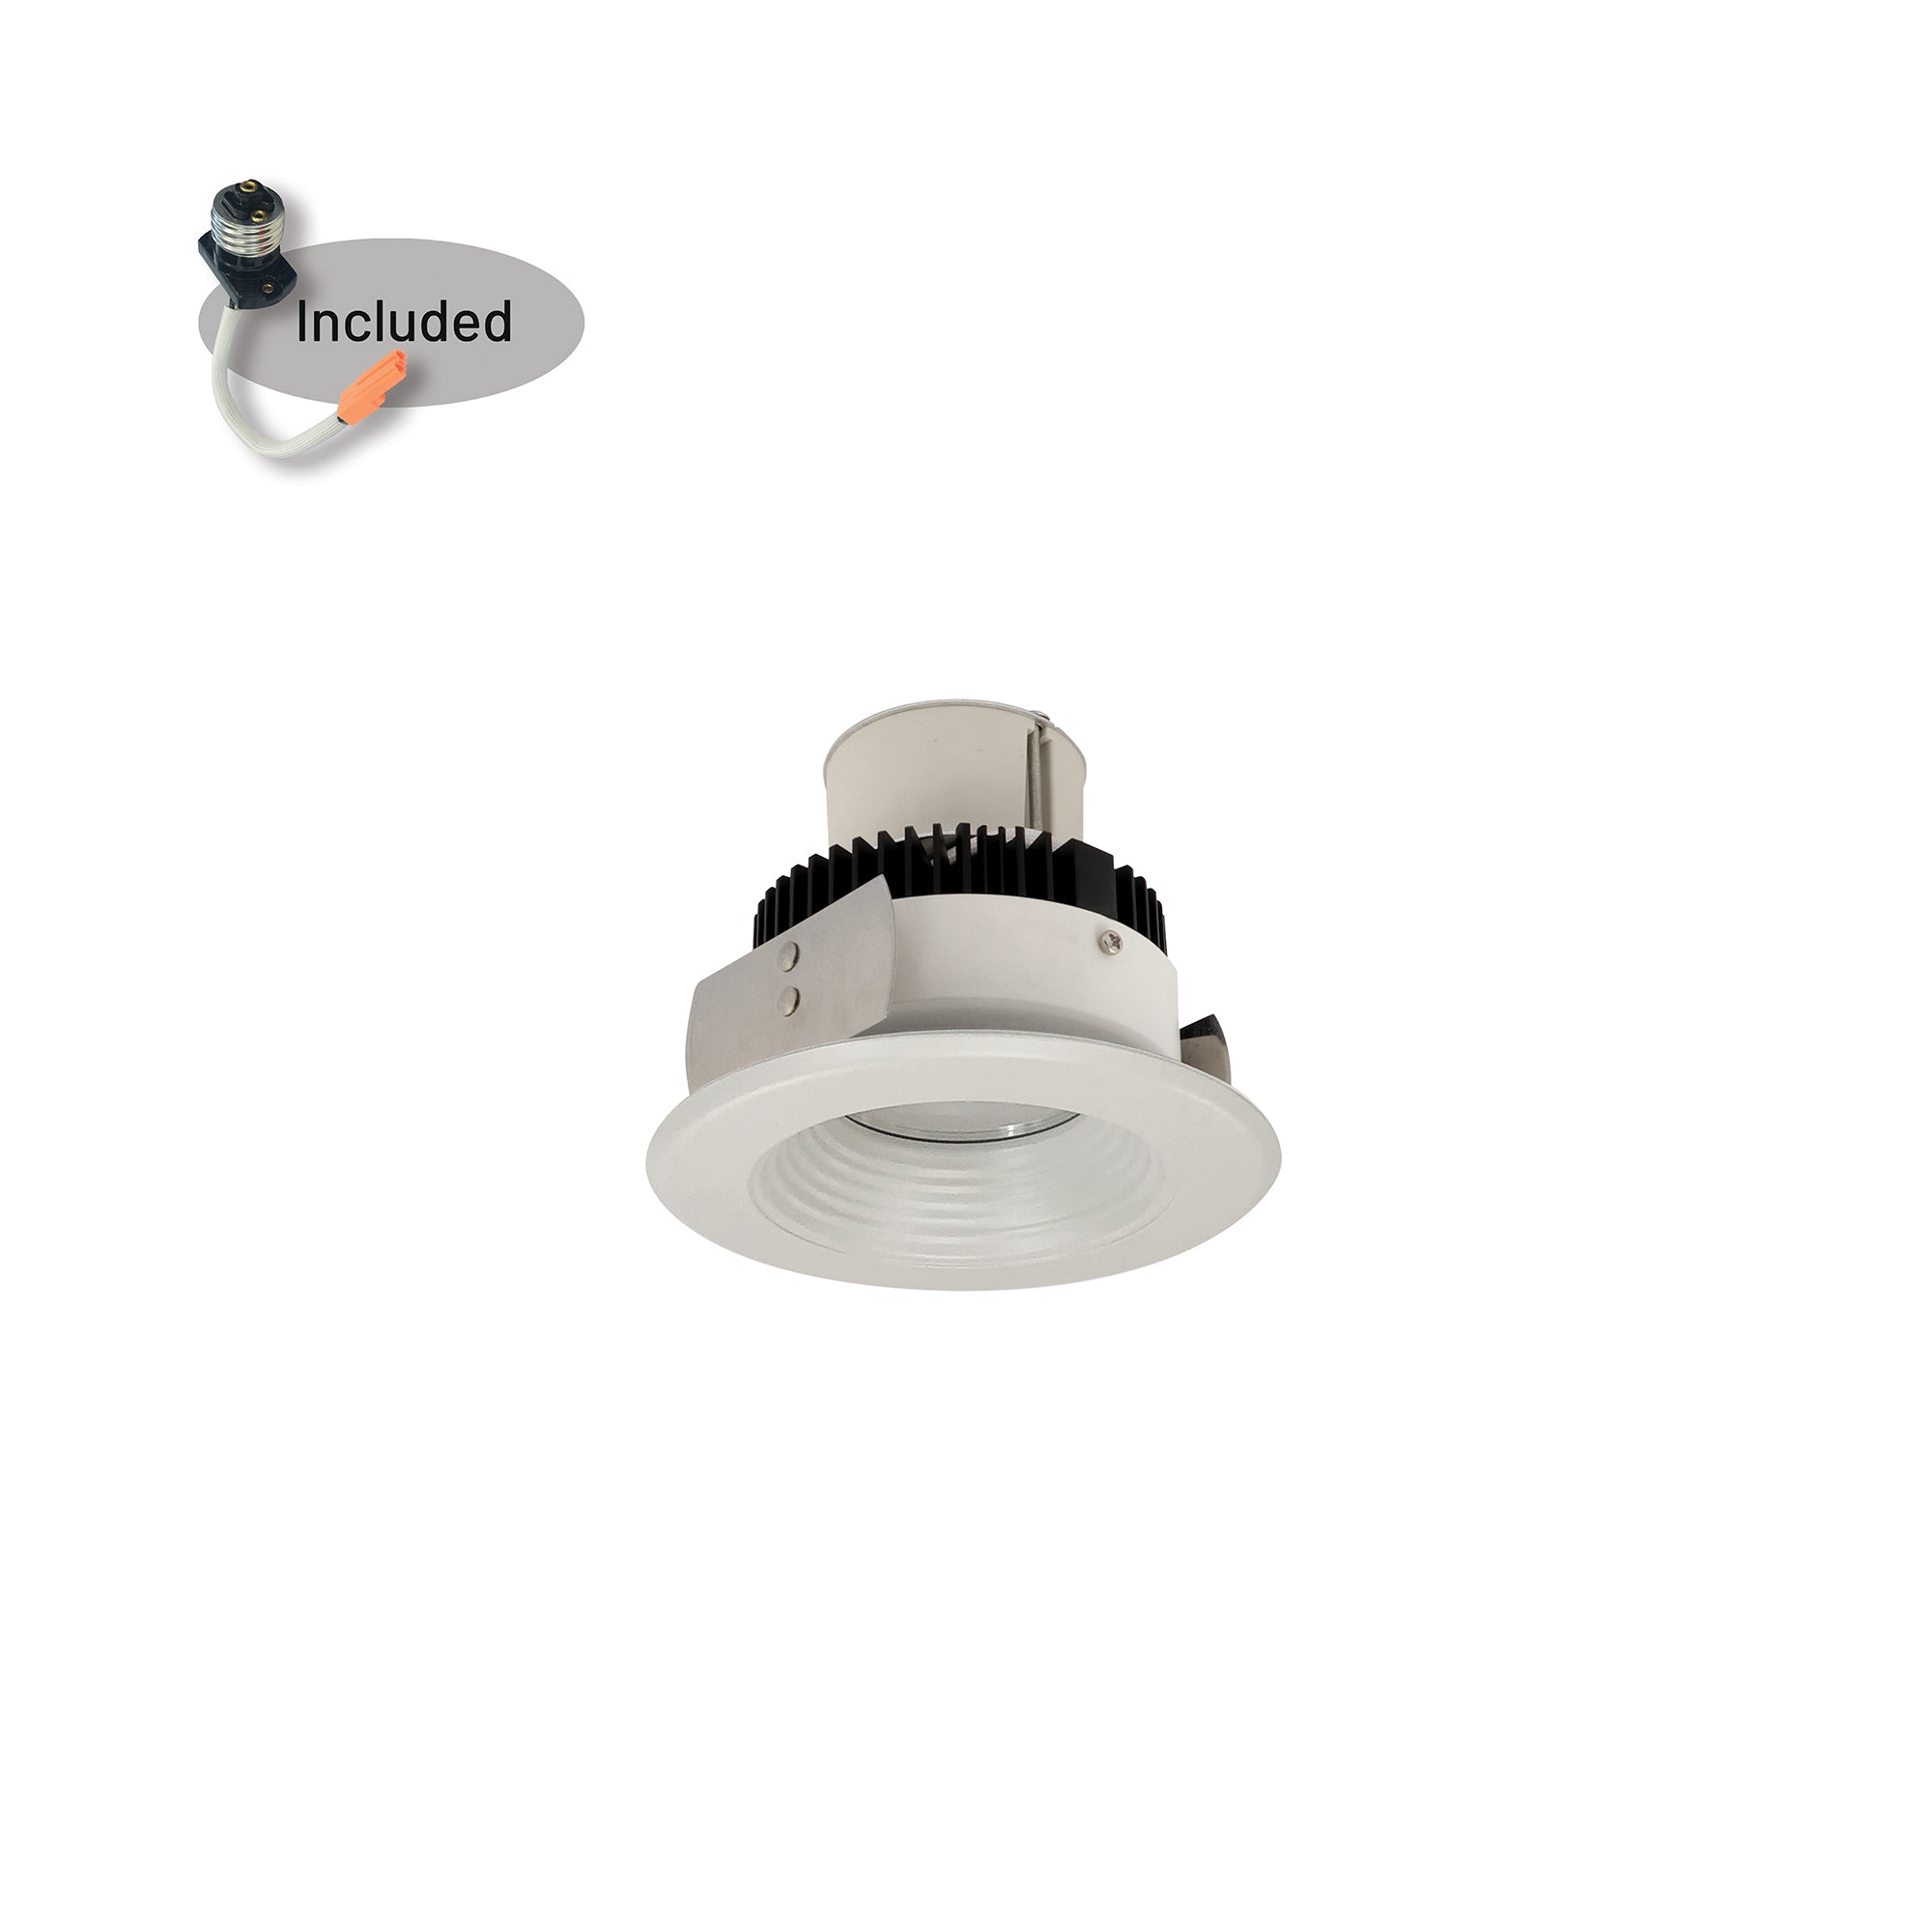 Nora Lighting LE69 - NRMC2-42L0940MWW - Recessed - White